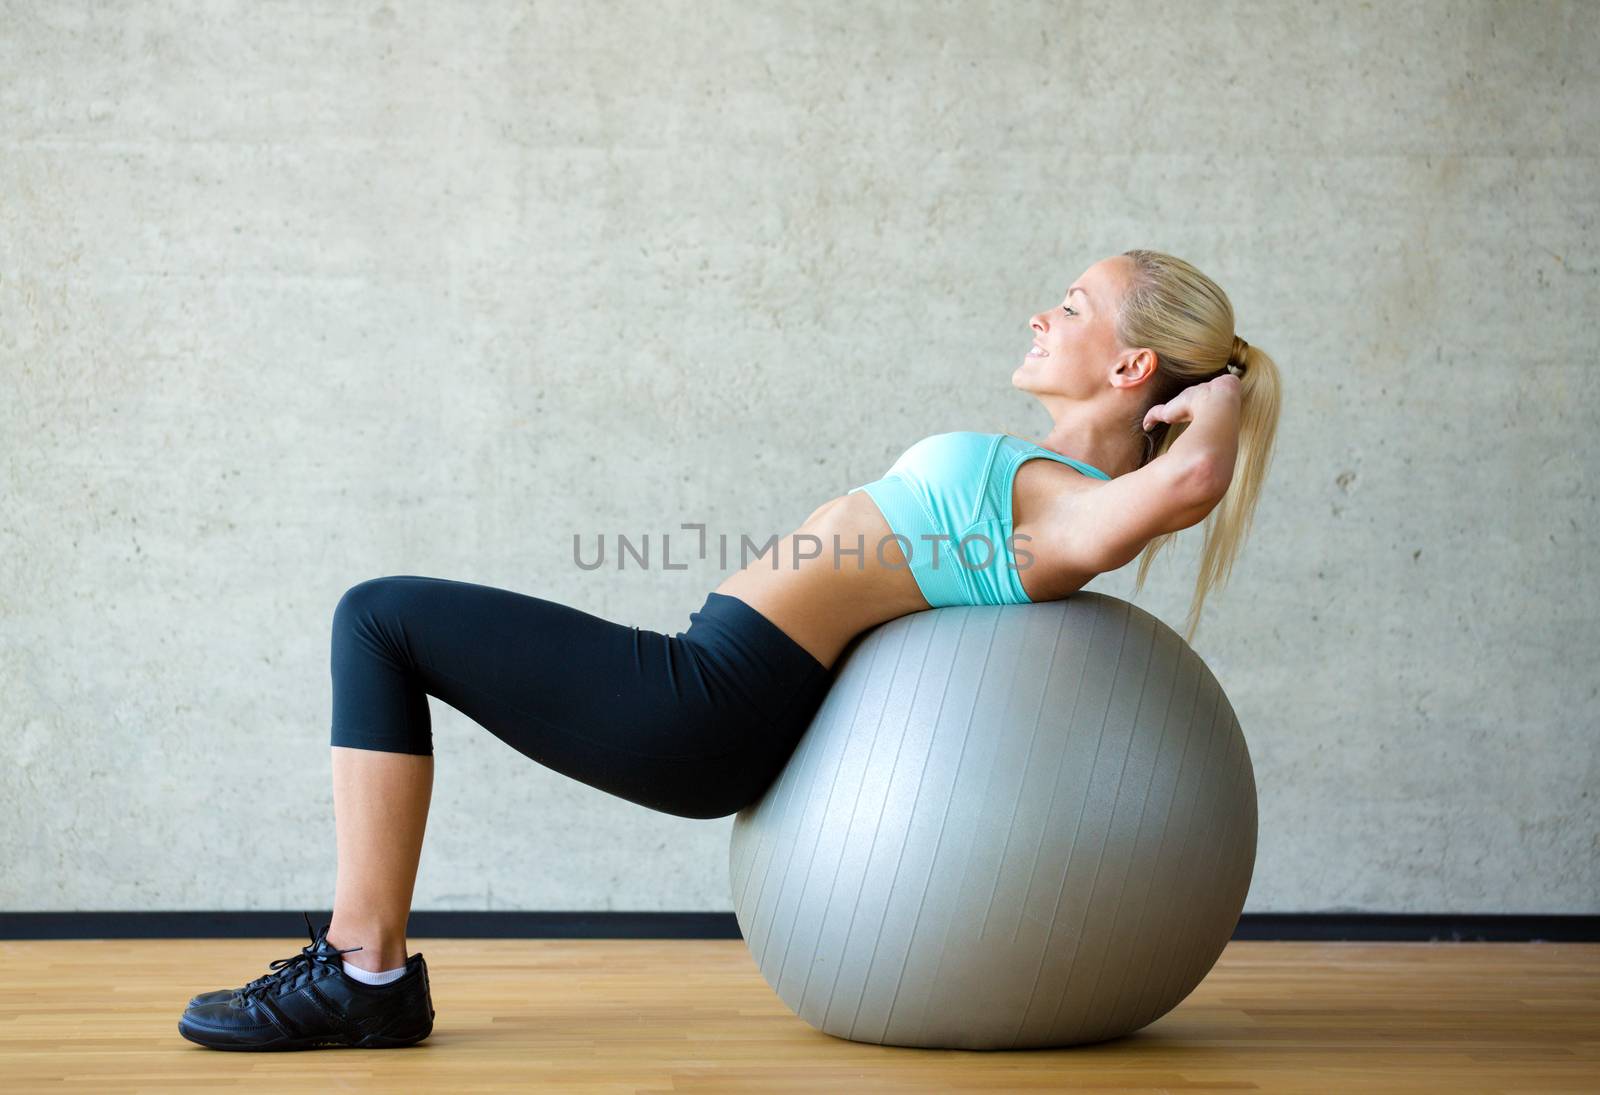 fitness, sport, training and lifestyle concept - smiling woman with exercise ball in gym